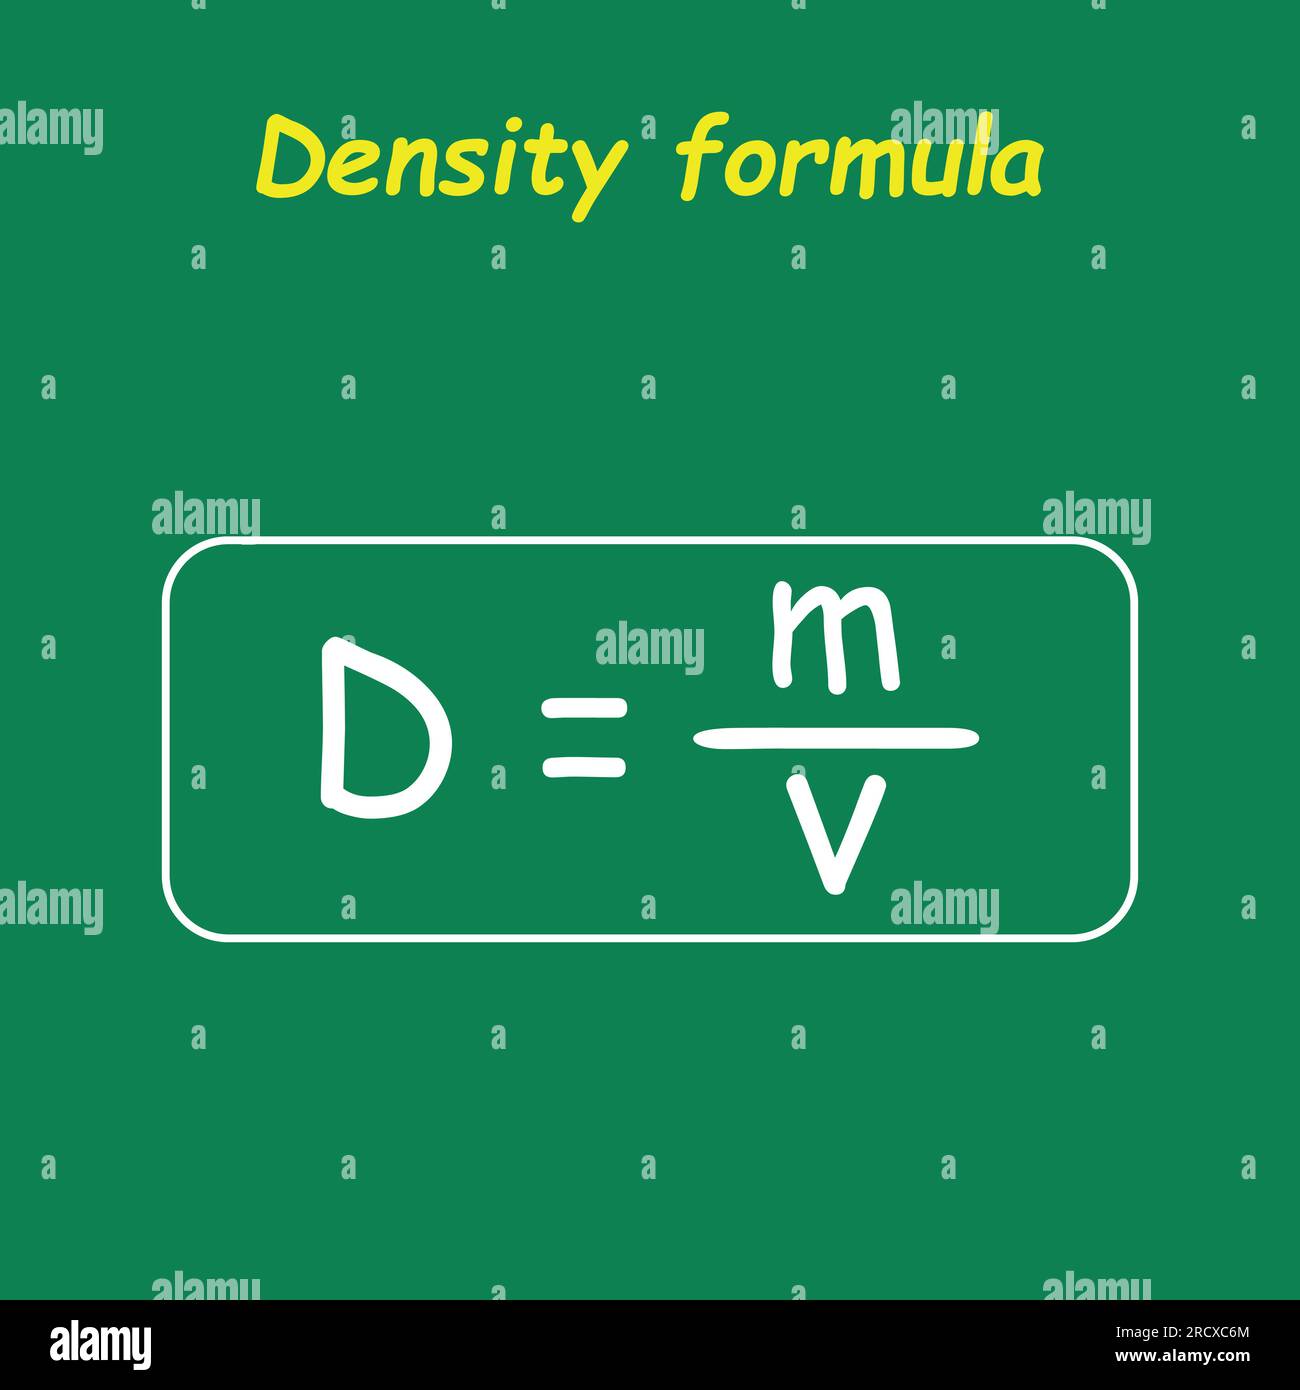 Density, mass and volume formula in chemistry. Vector illustration isolated on white background. Stock Vector